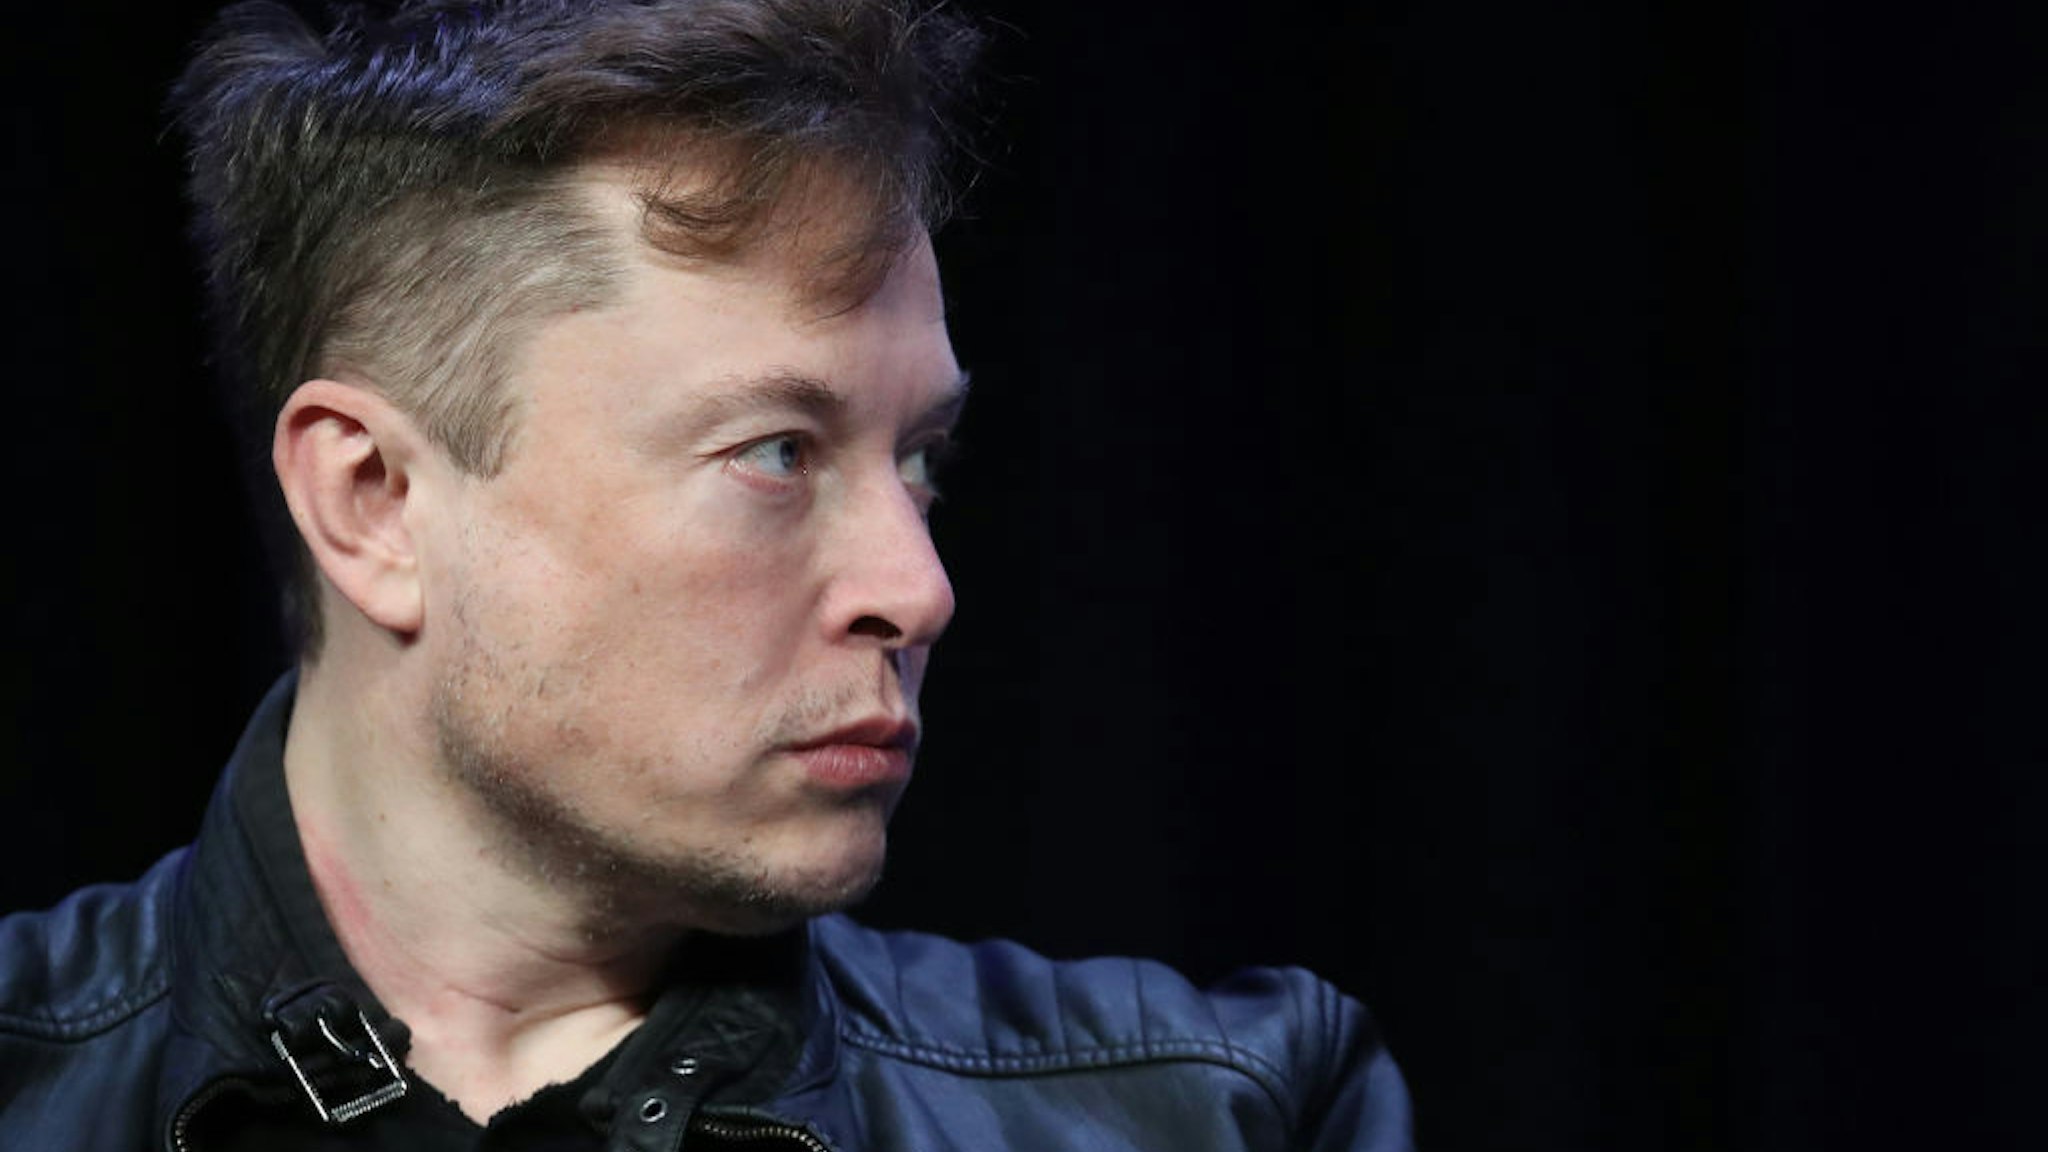 Elon Musk, founder and chief engineer of SpaceX speaks at the 2020 Satellite Conference and Exhibition March 9, 2020 in Washington, DC.